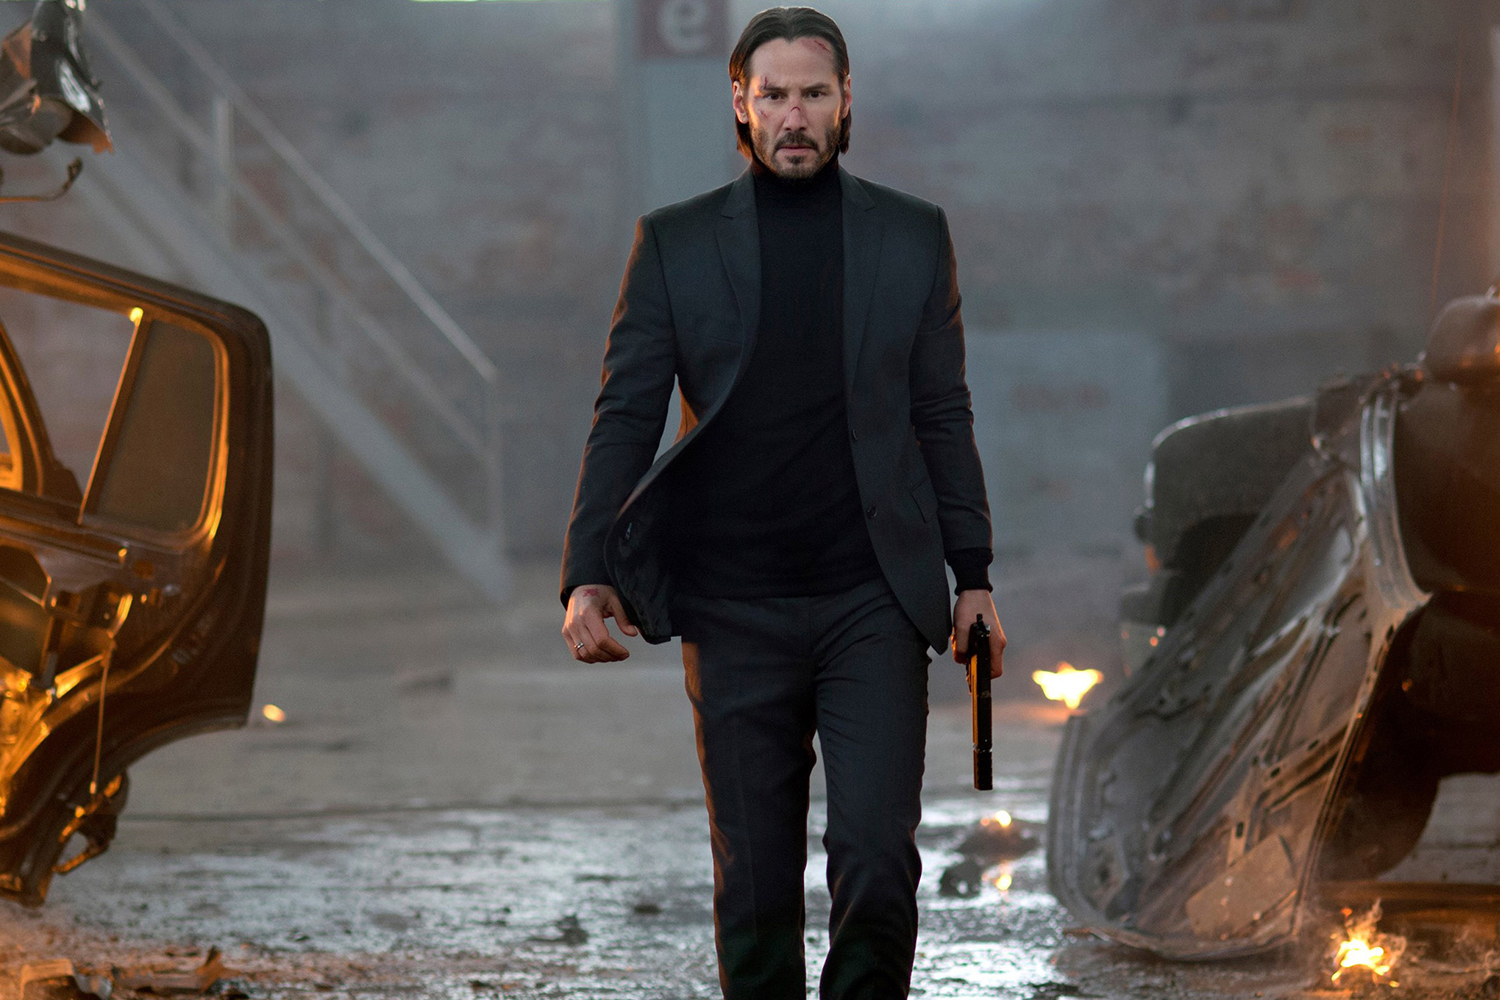 Here's How To Watch 'John Wick: Chapter 4' Online Free – When Is John Wick  4 (2023) Available To Streaming On Peacock, HBO Max Or Netflix